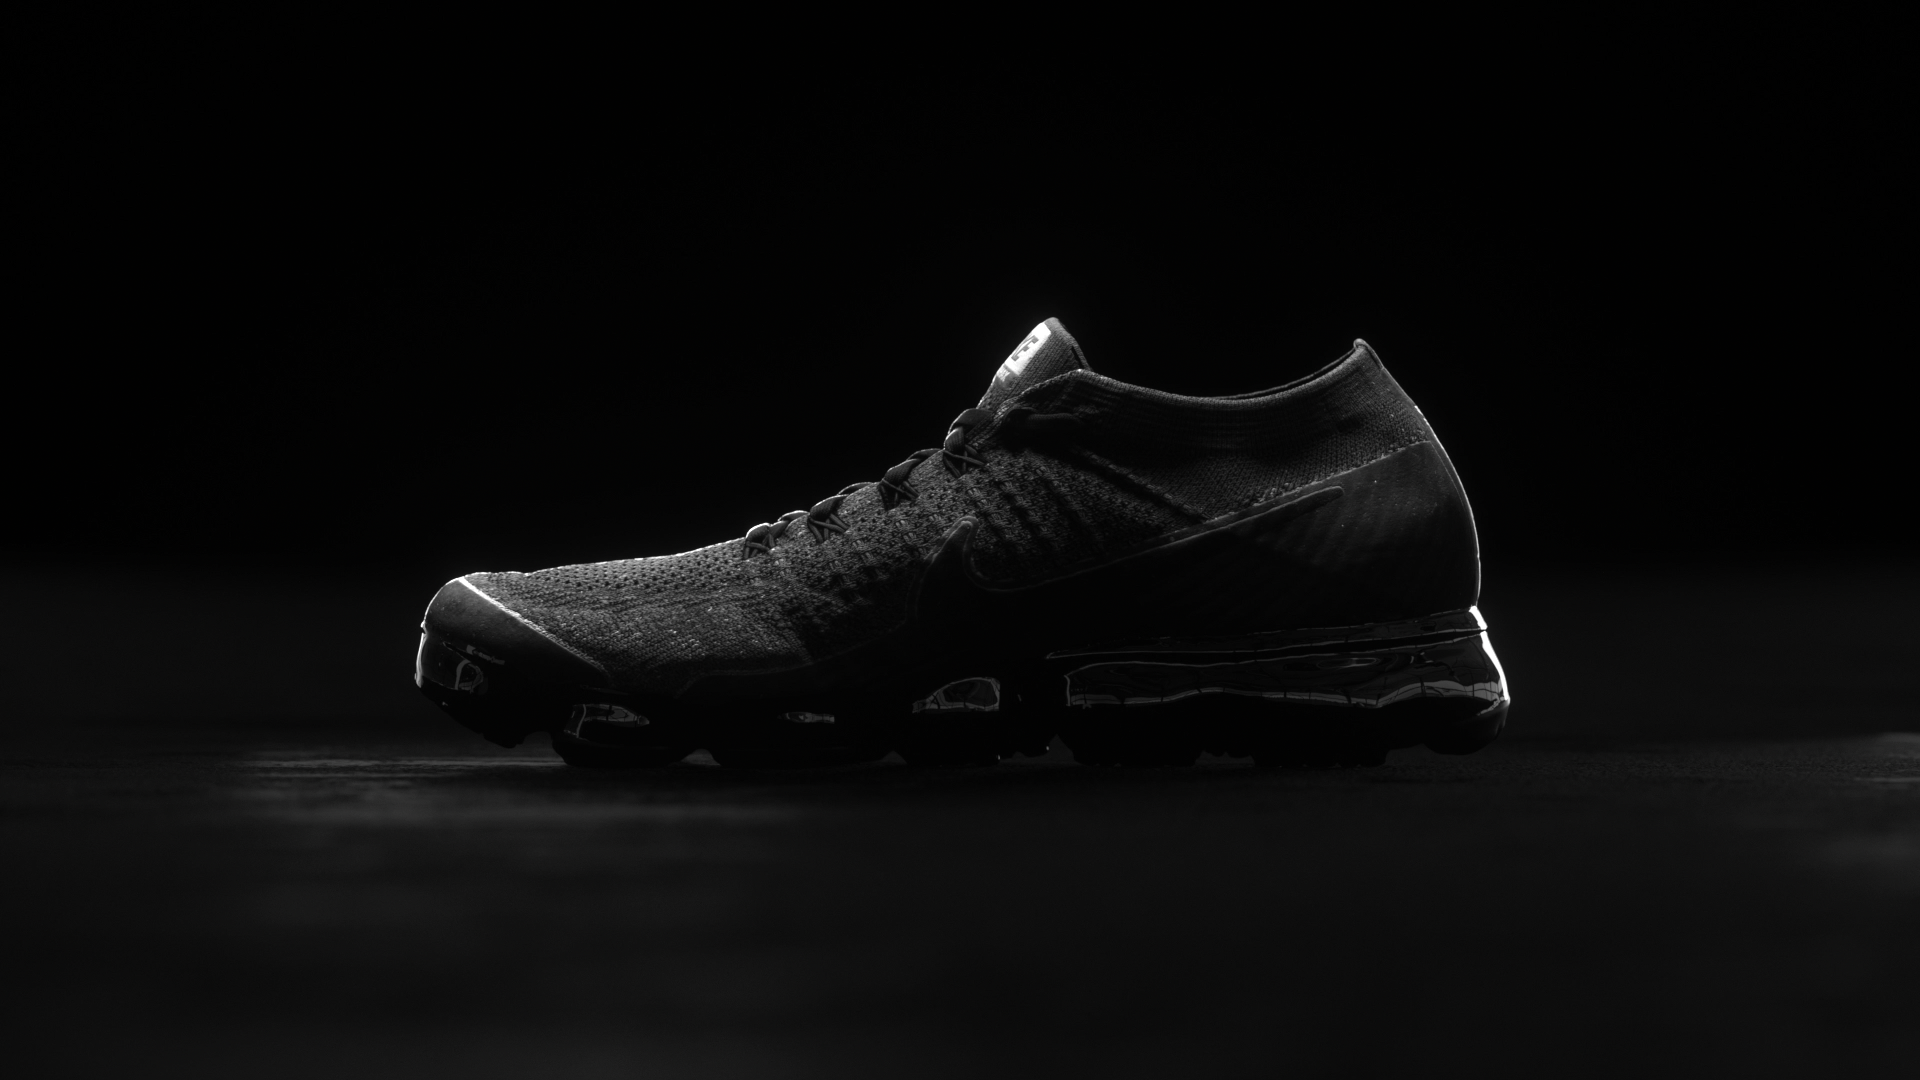 NIKE VAPORMAX on Behance17d67c65252289.5aedcbd97ee1f.png